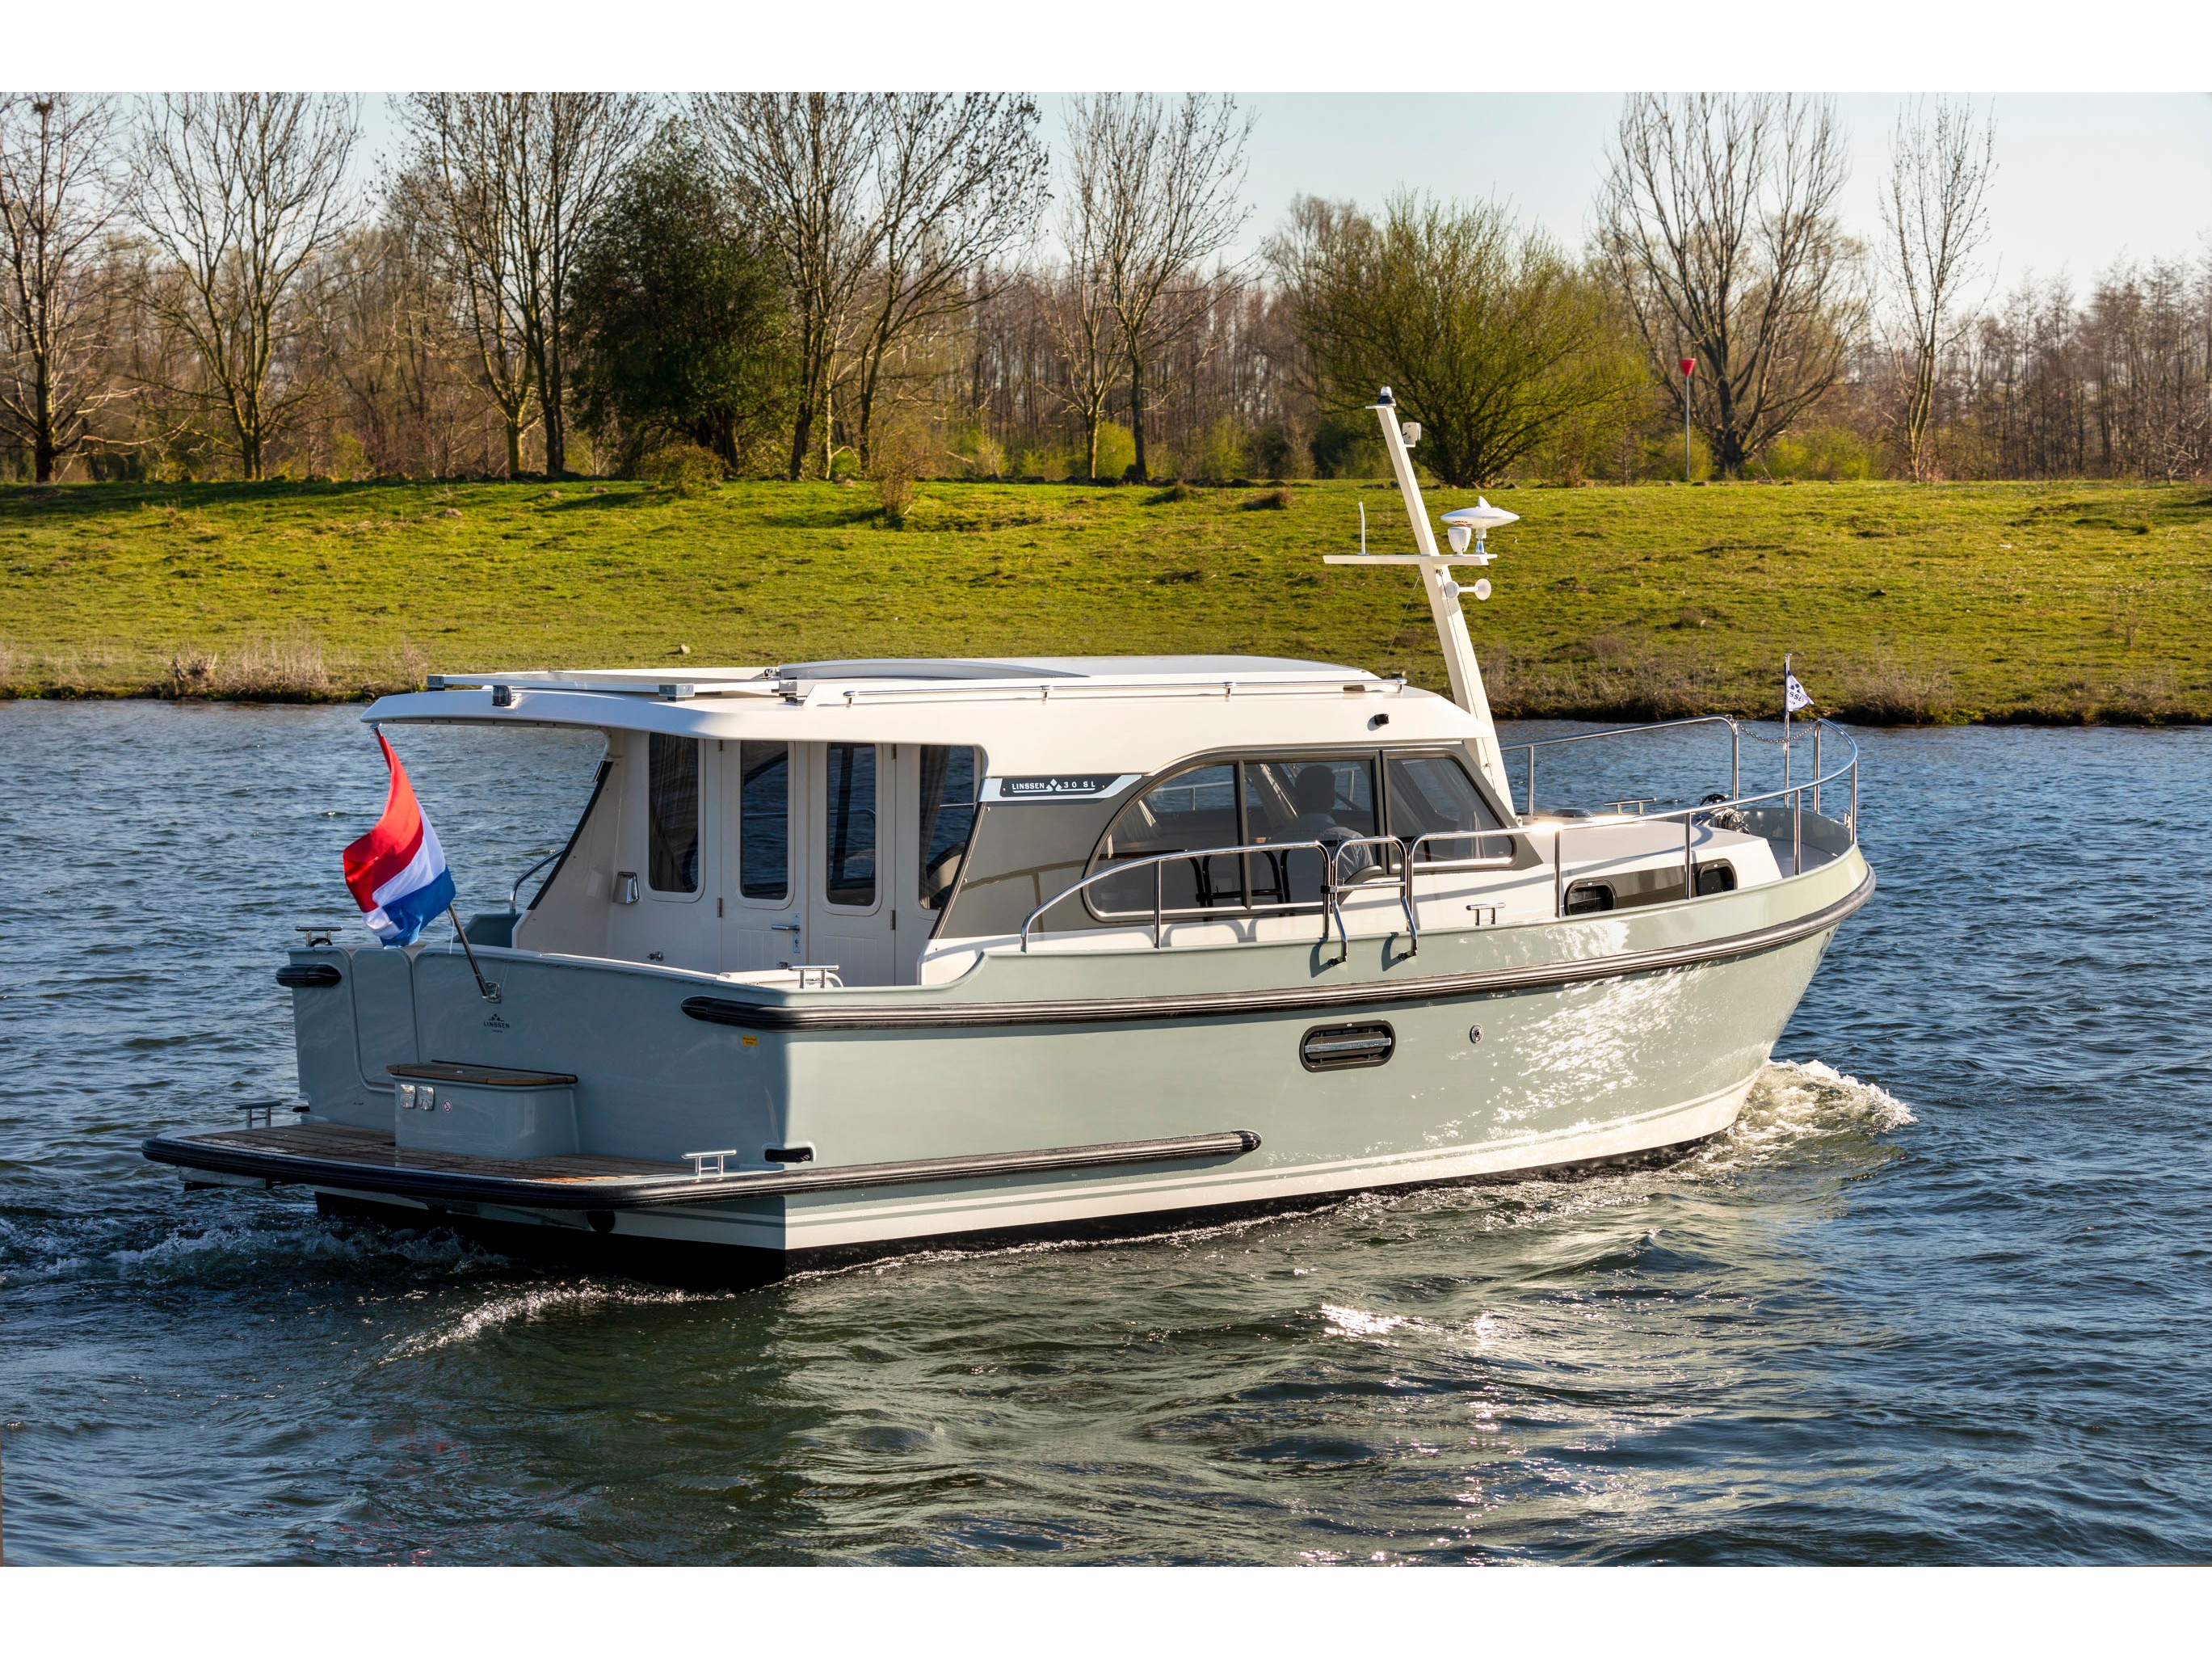 Linssen Grand Sturdy 29.9 Sedan - Yacht Charter Germany & Boat hire in Germany Mirow Jachthafen Mirow 1